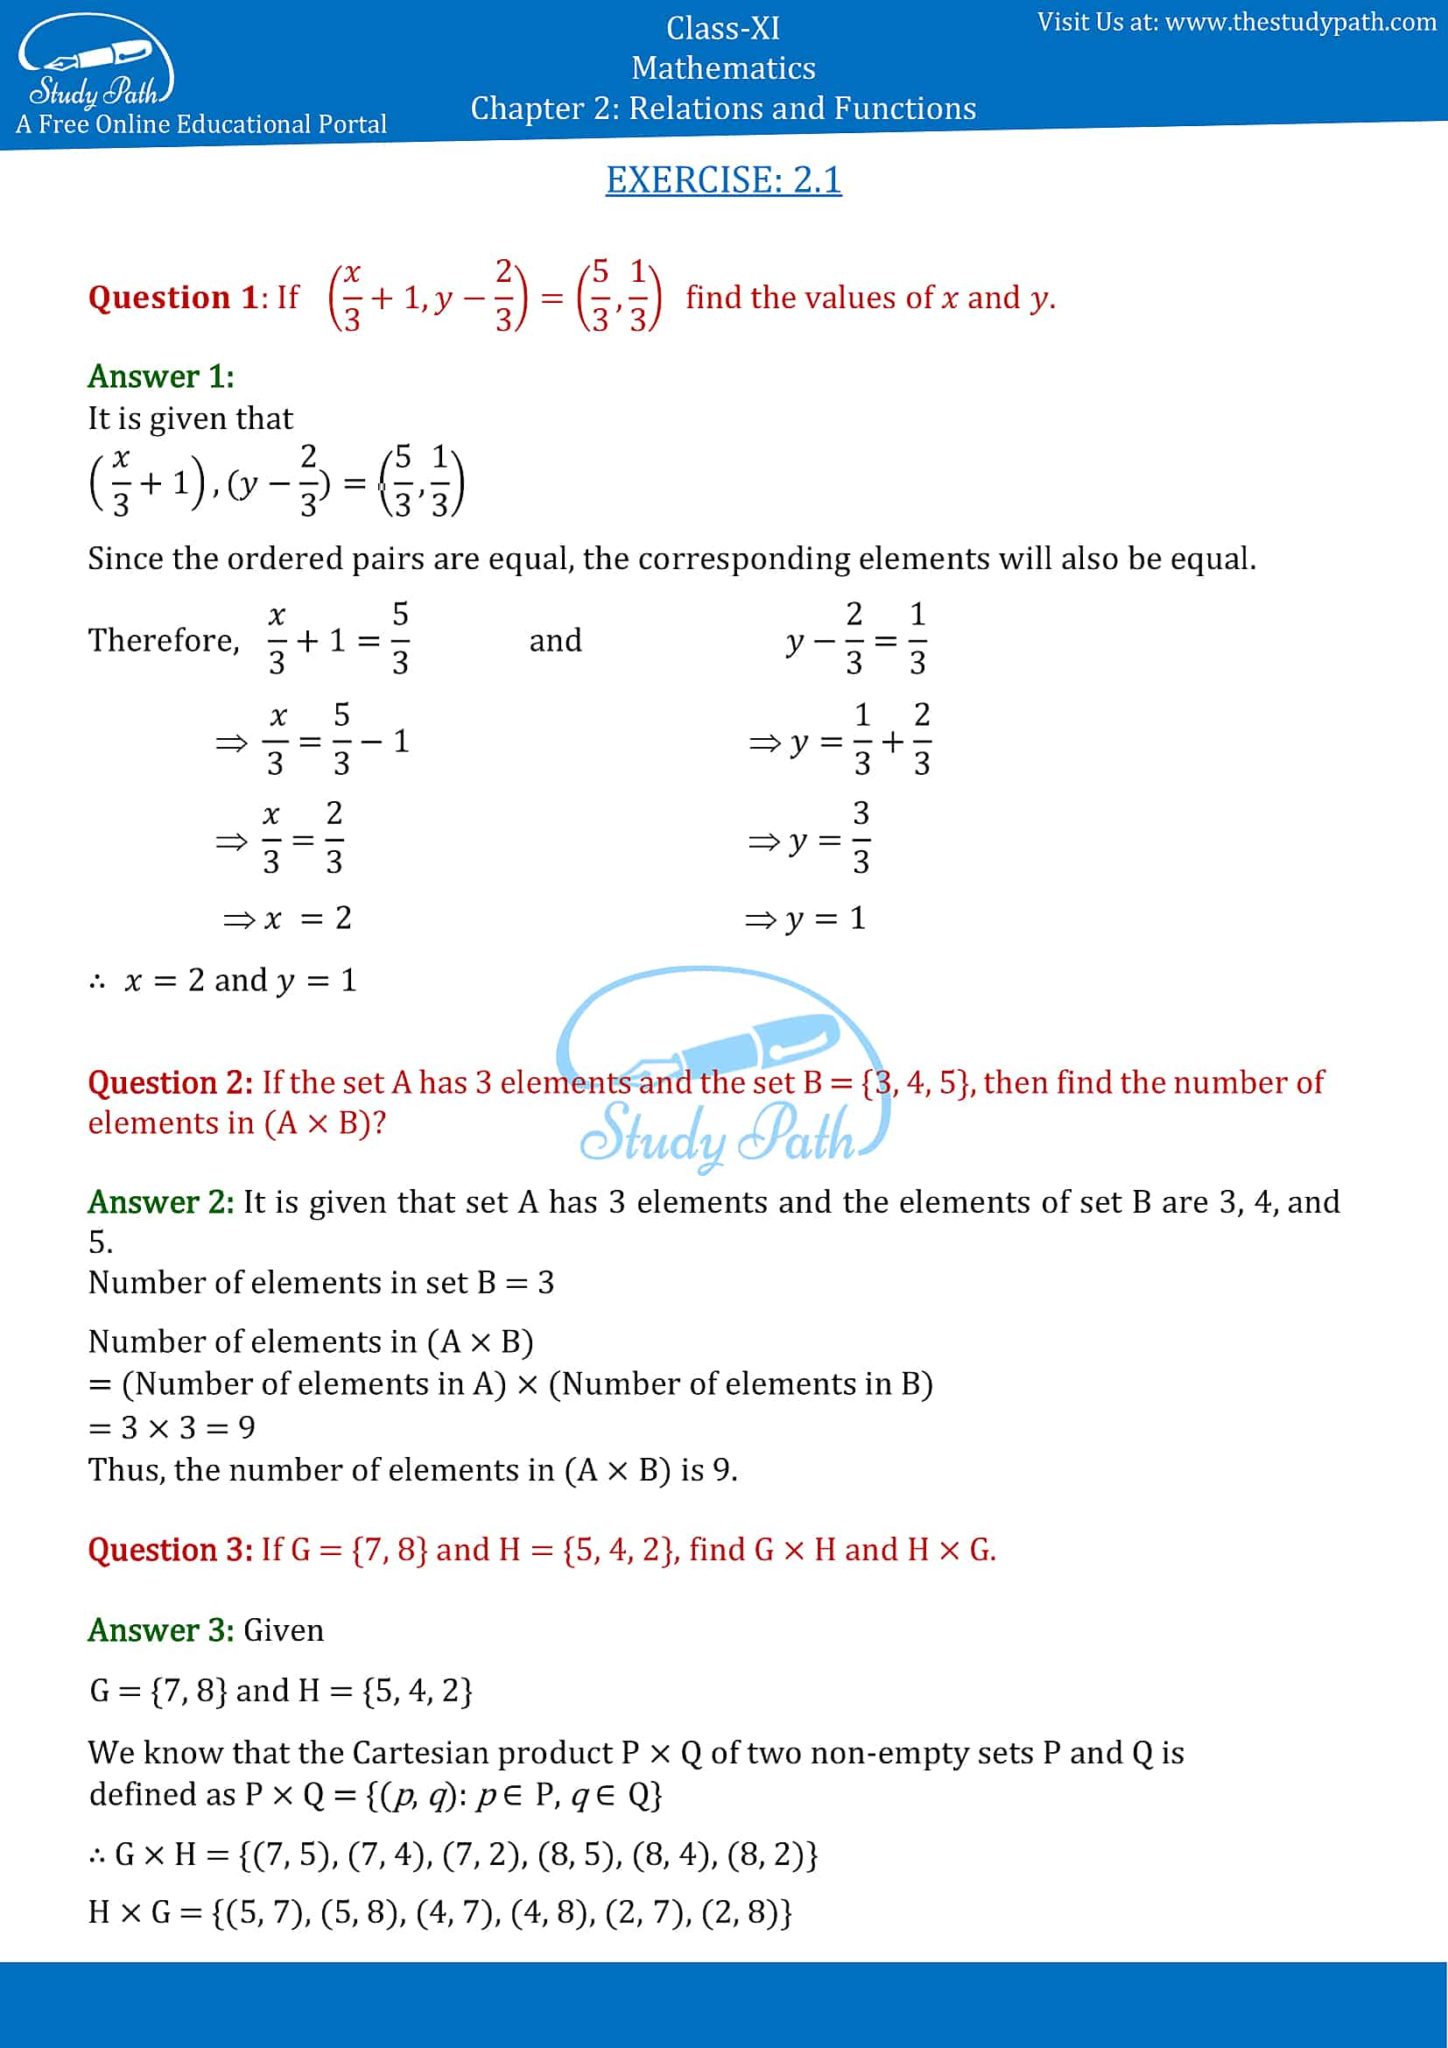 relations and functions class 11 exercise 2.1 solutions